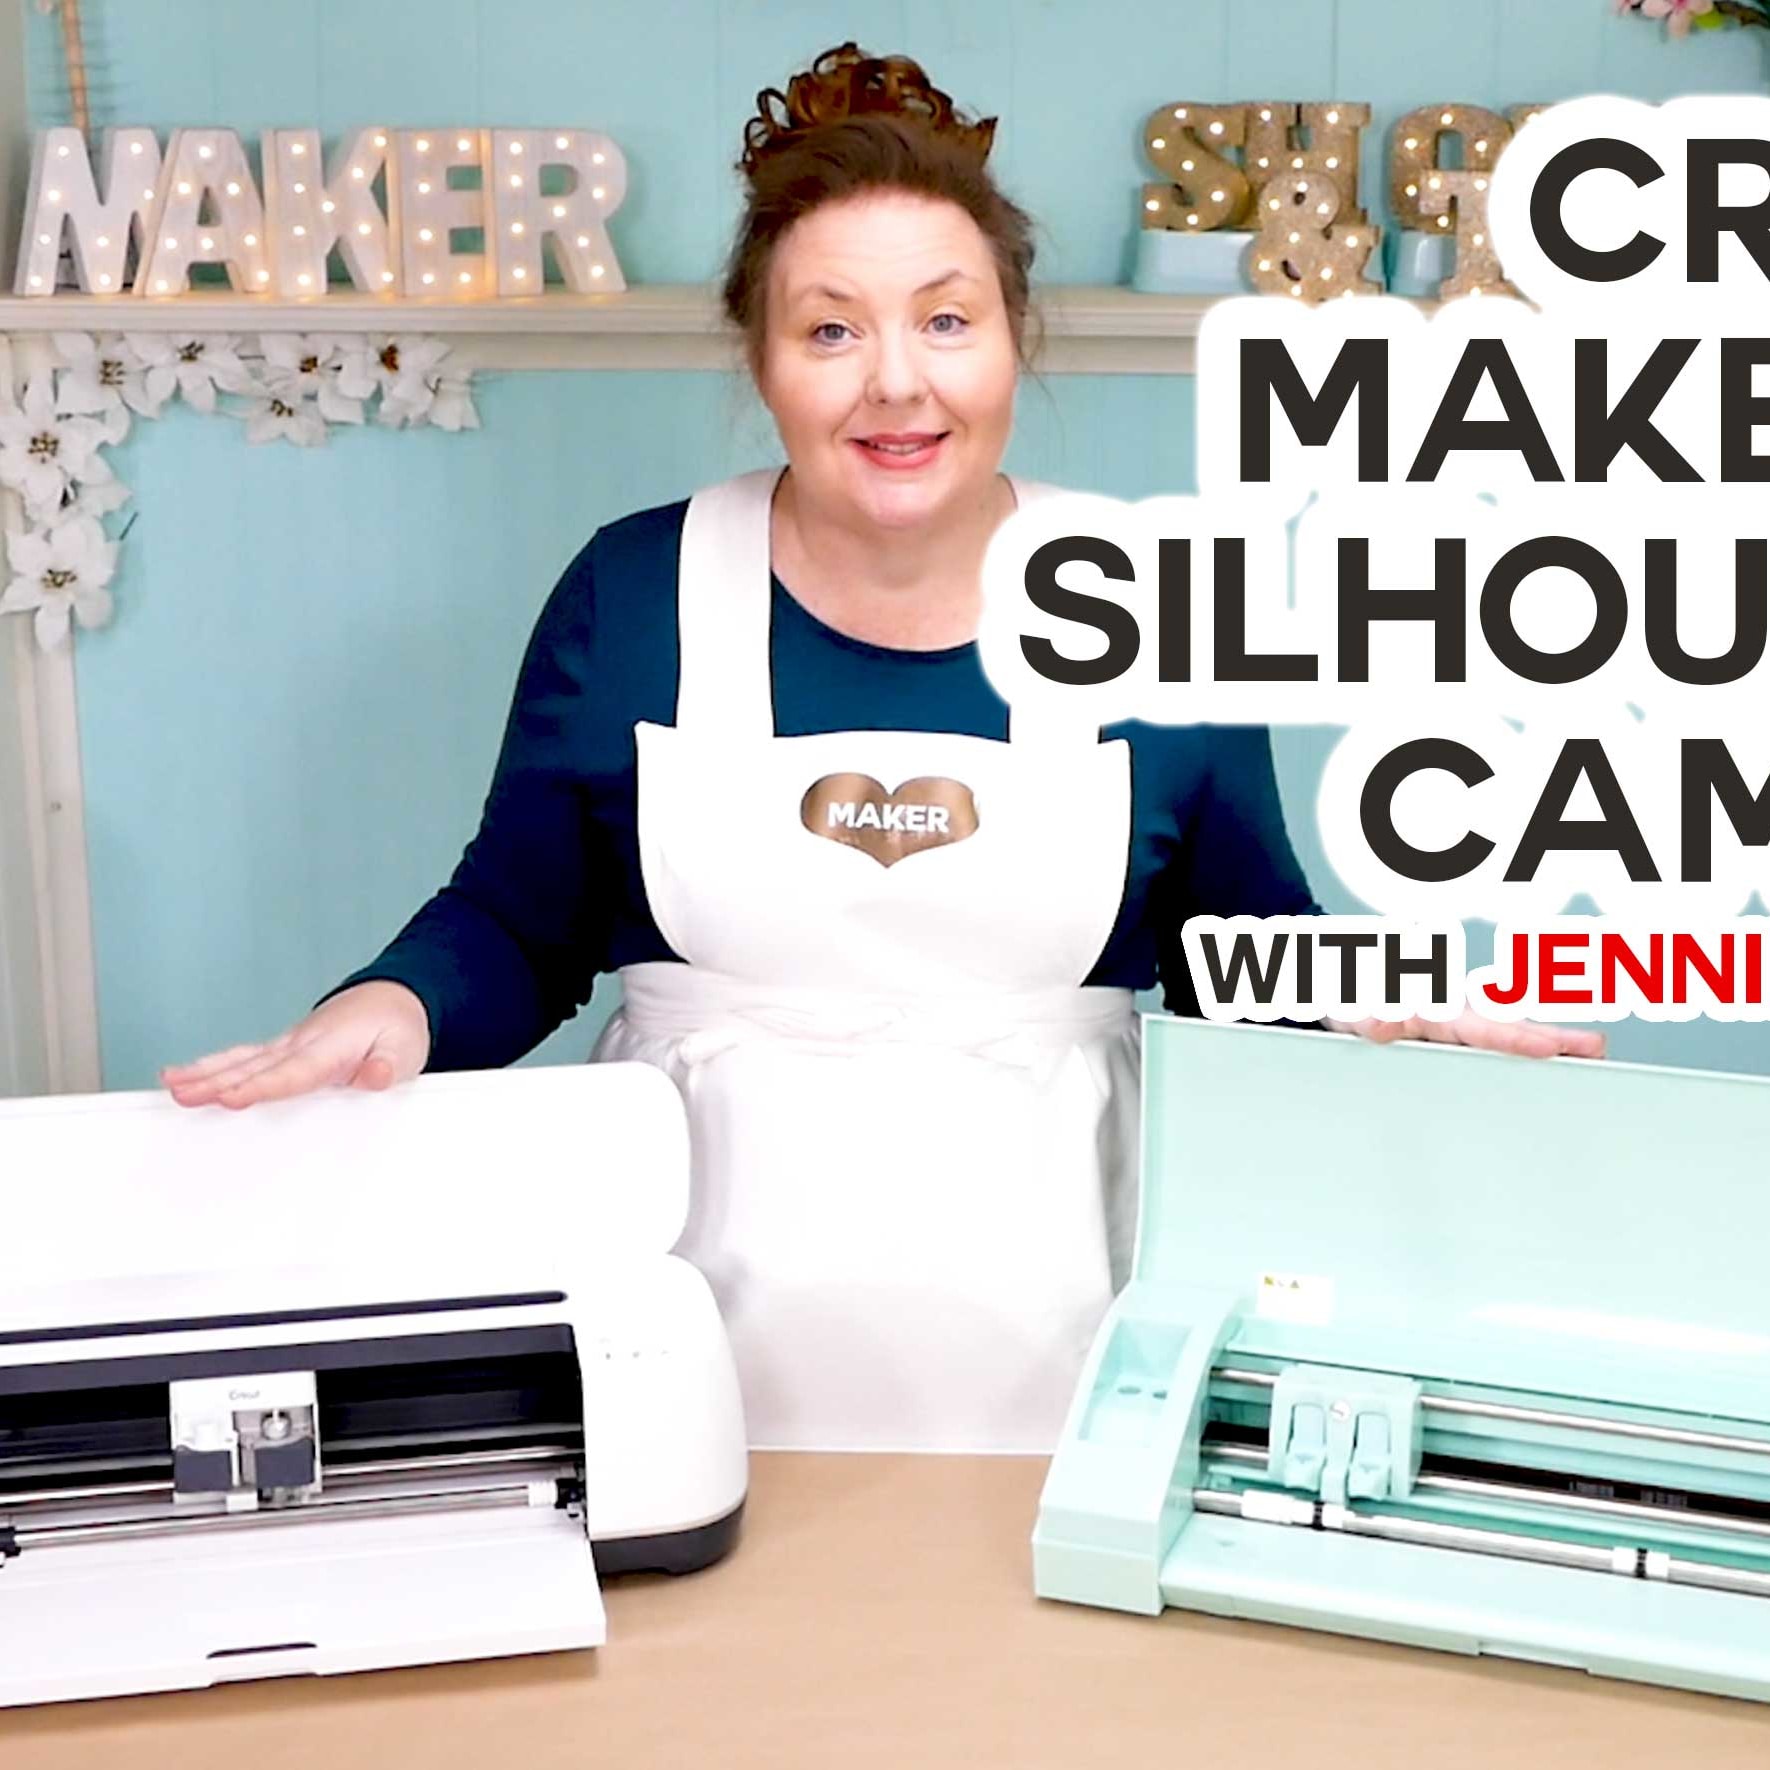 How to Clean Fabric Cutting Mats for Silhouette Cameo and Cricut Maker 